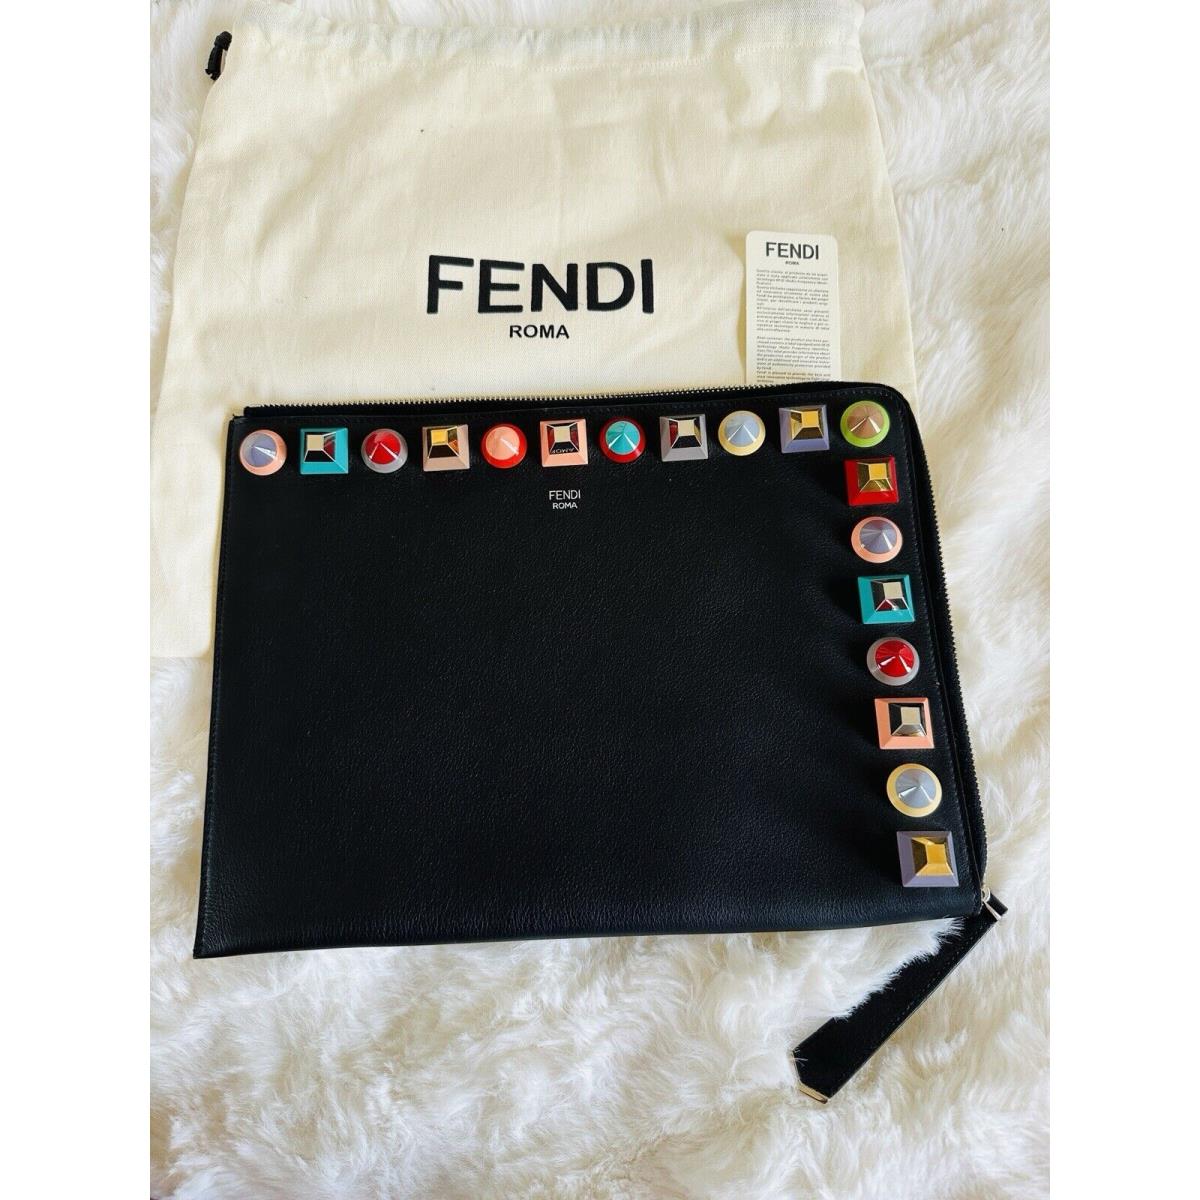 Fendi Multi Color Stud Black Smooth Leather Clutch Bag with Zipper